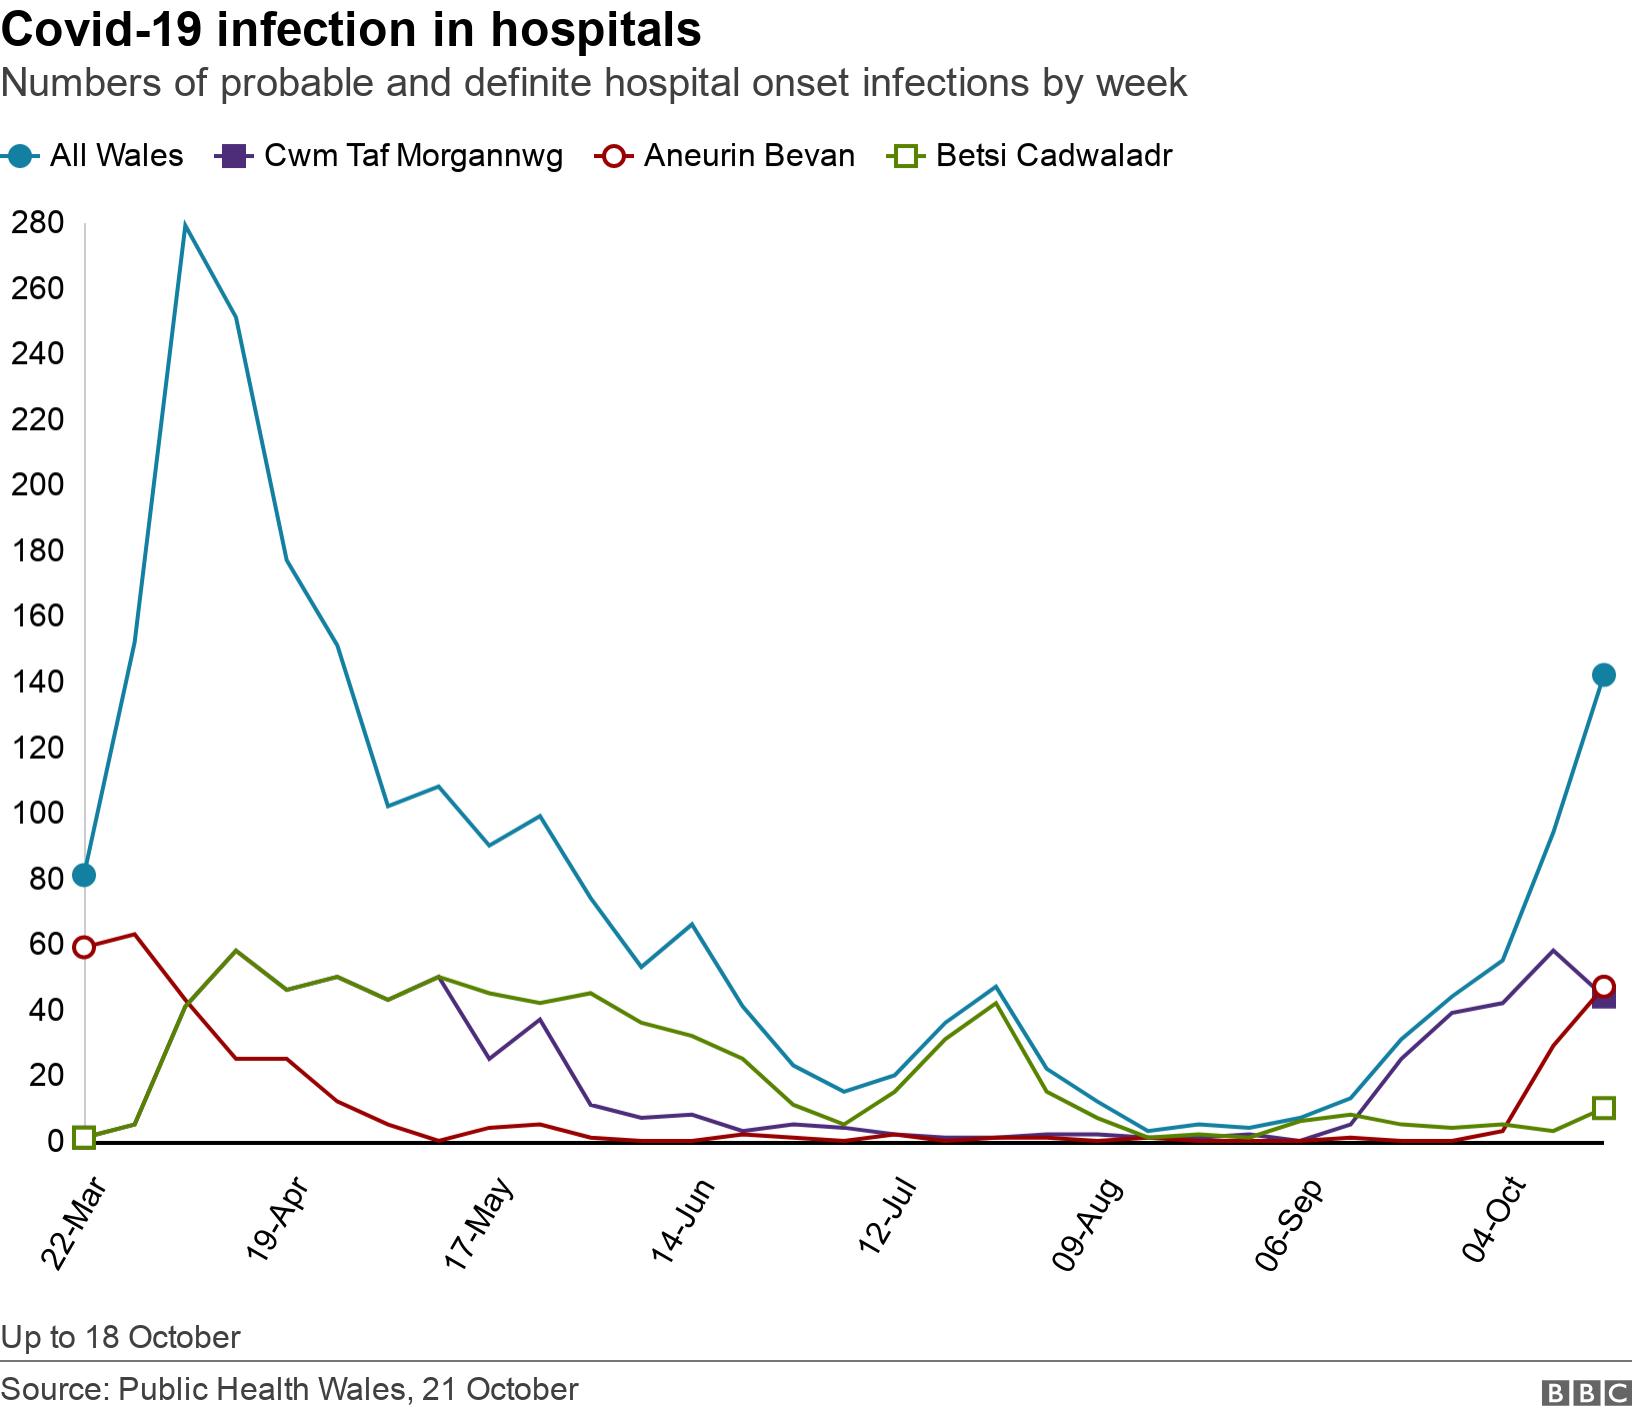 Covid-19 infection in hospitals. Numbers of probable and definite hospital onset infections by week.  Up to 18 October.